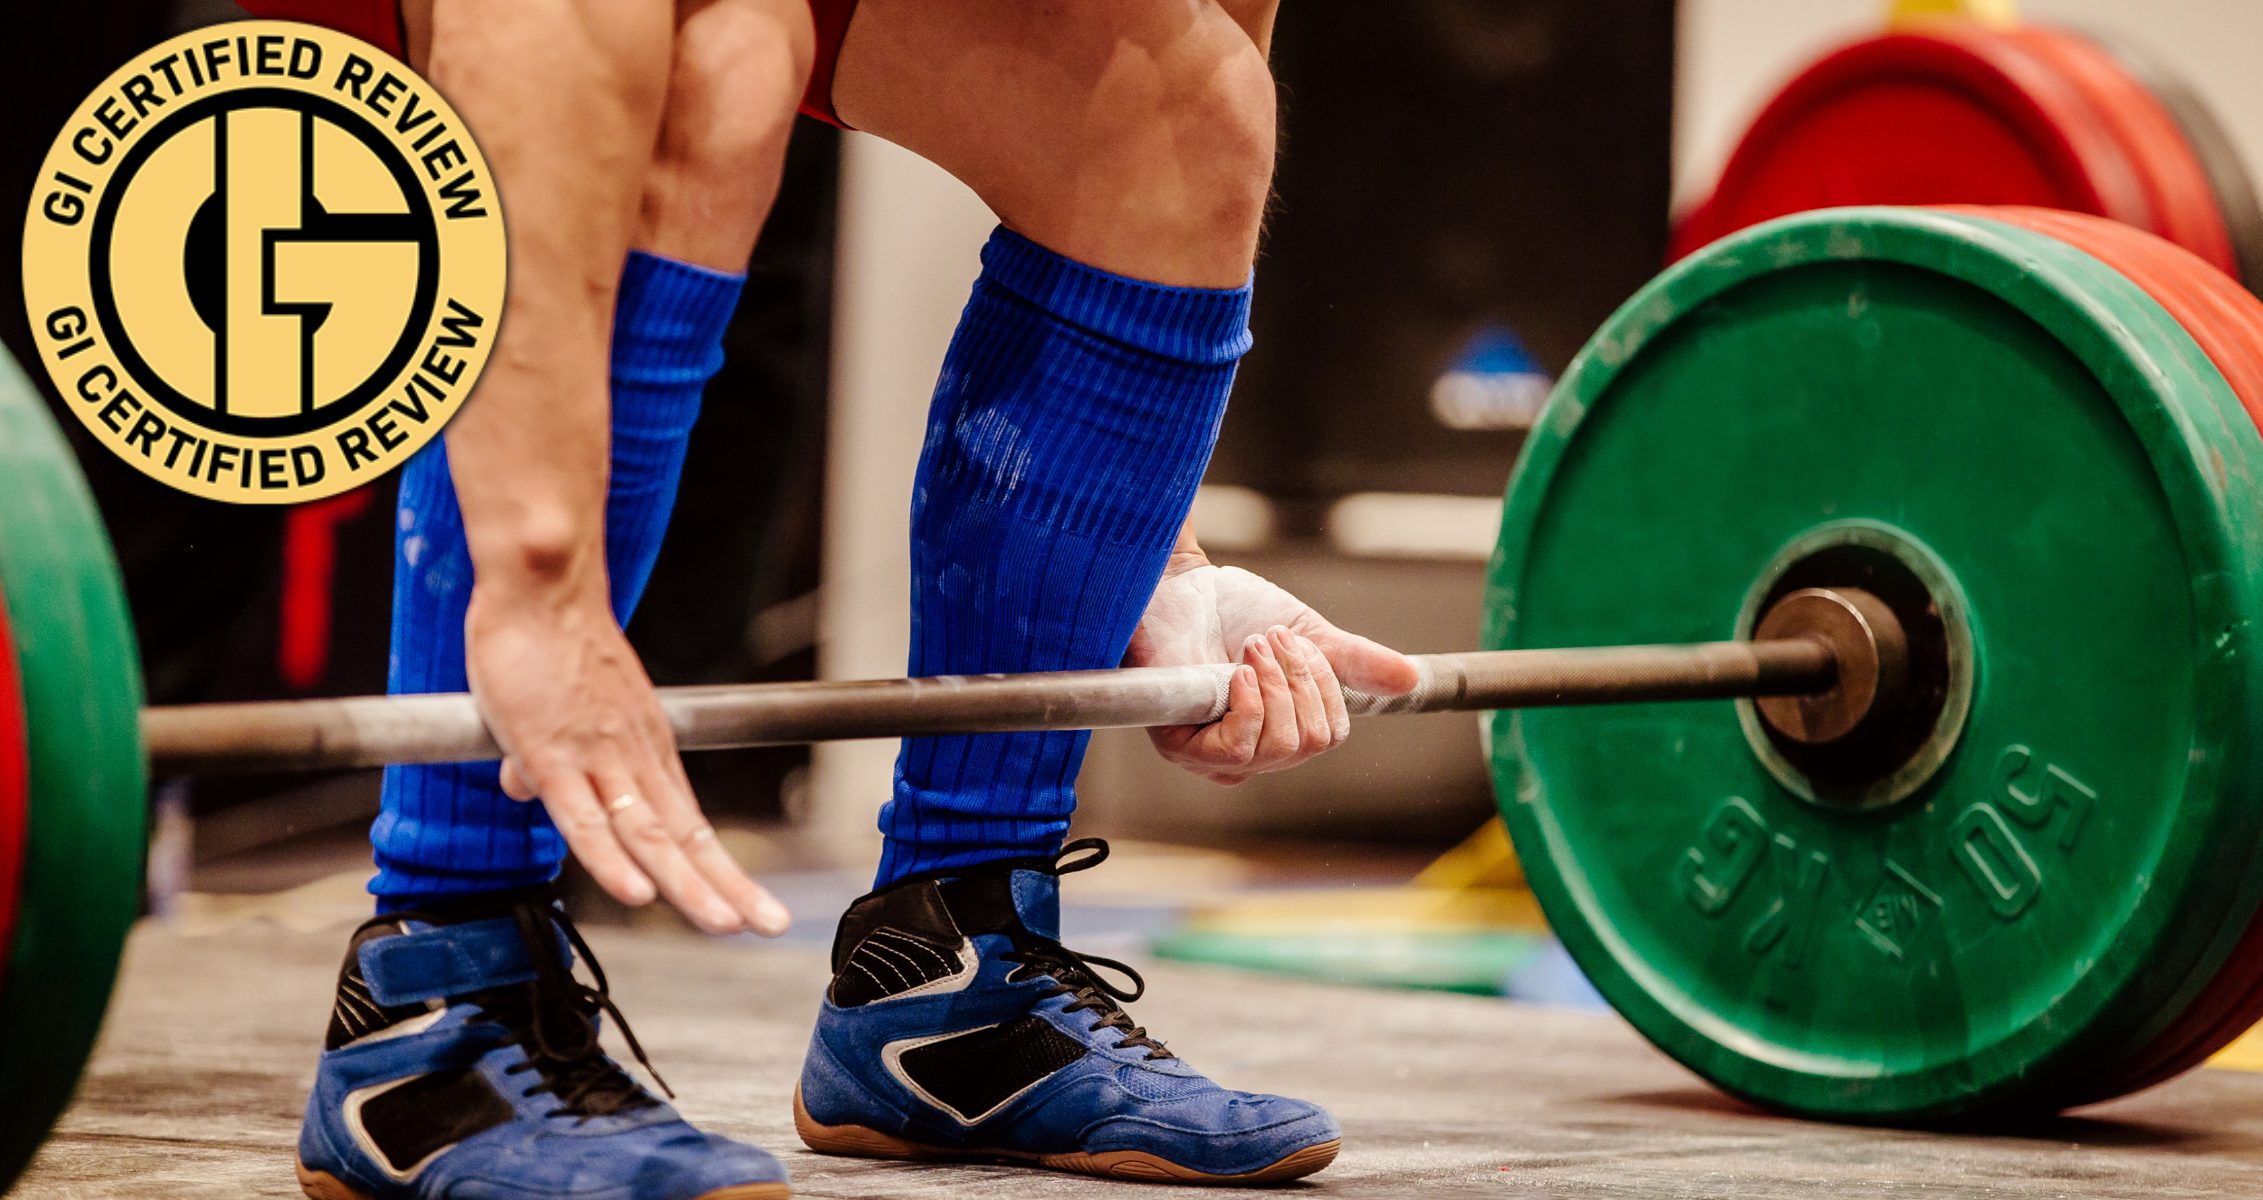 The Best 4 Deadlift Socks For Weightlifting & Powerlifts (Updated